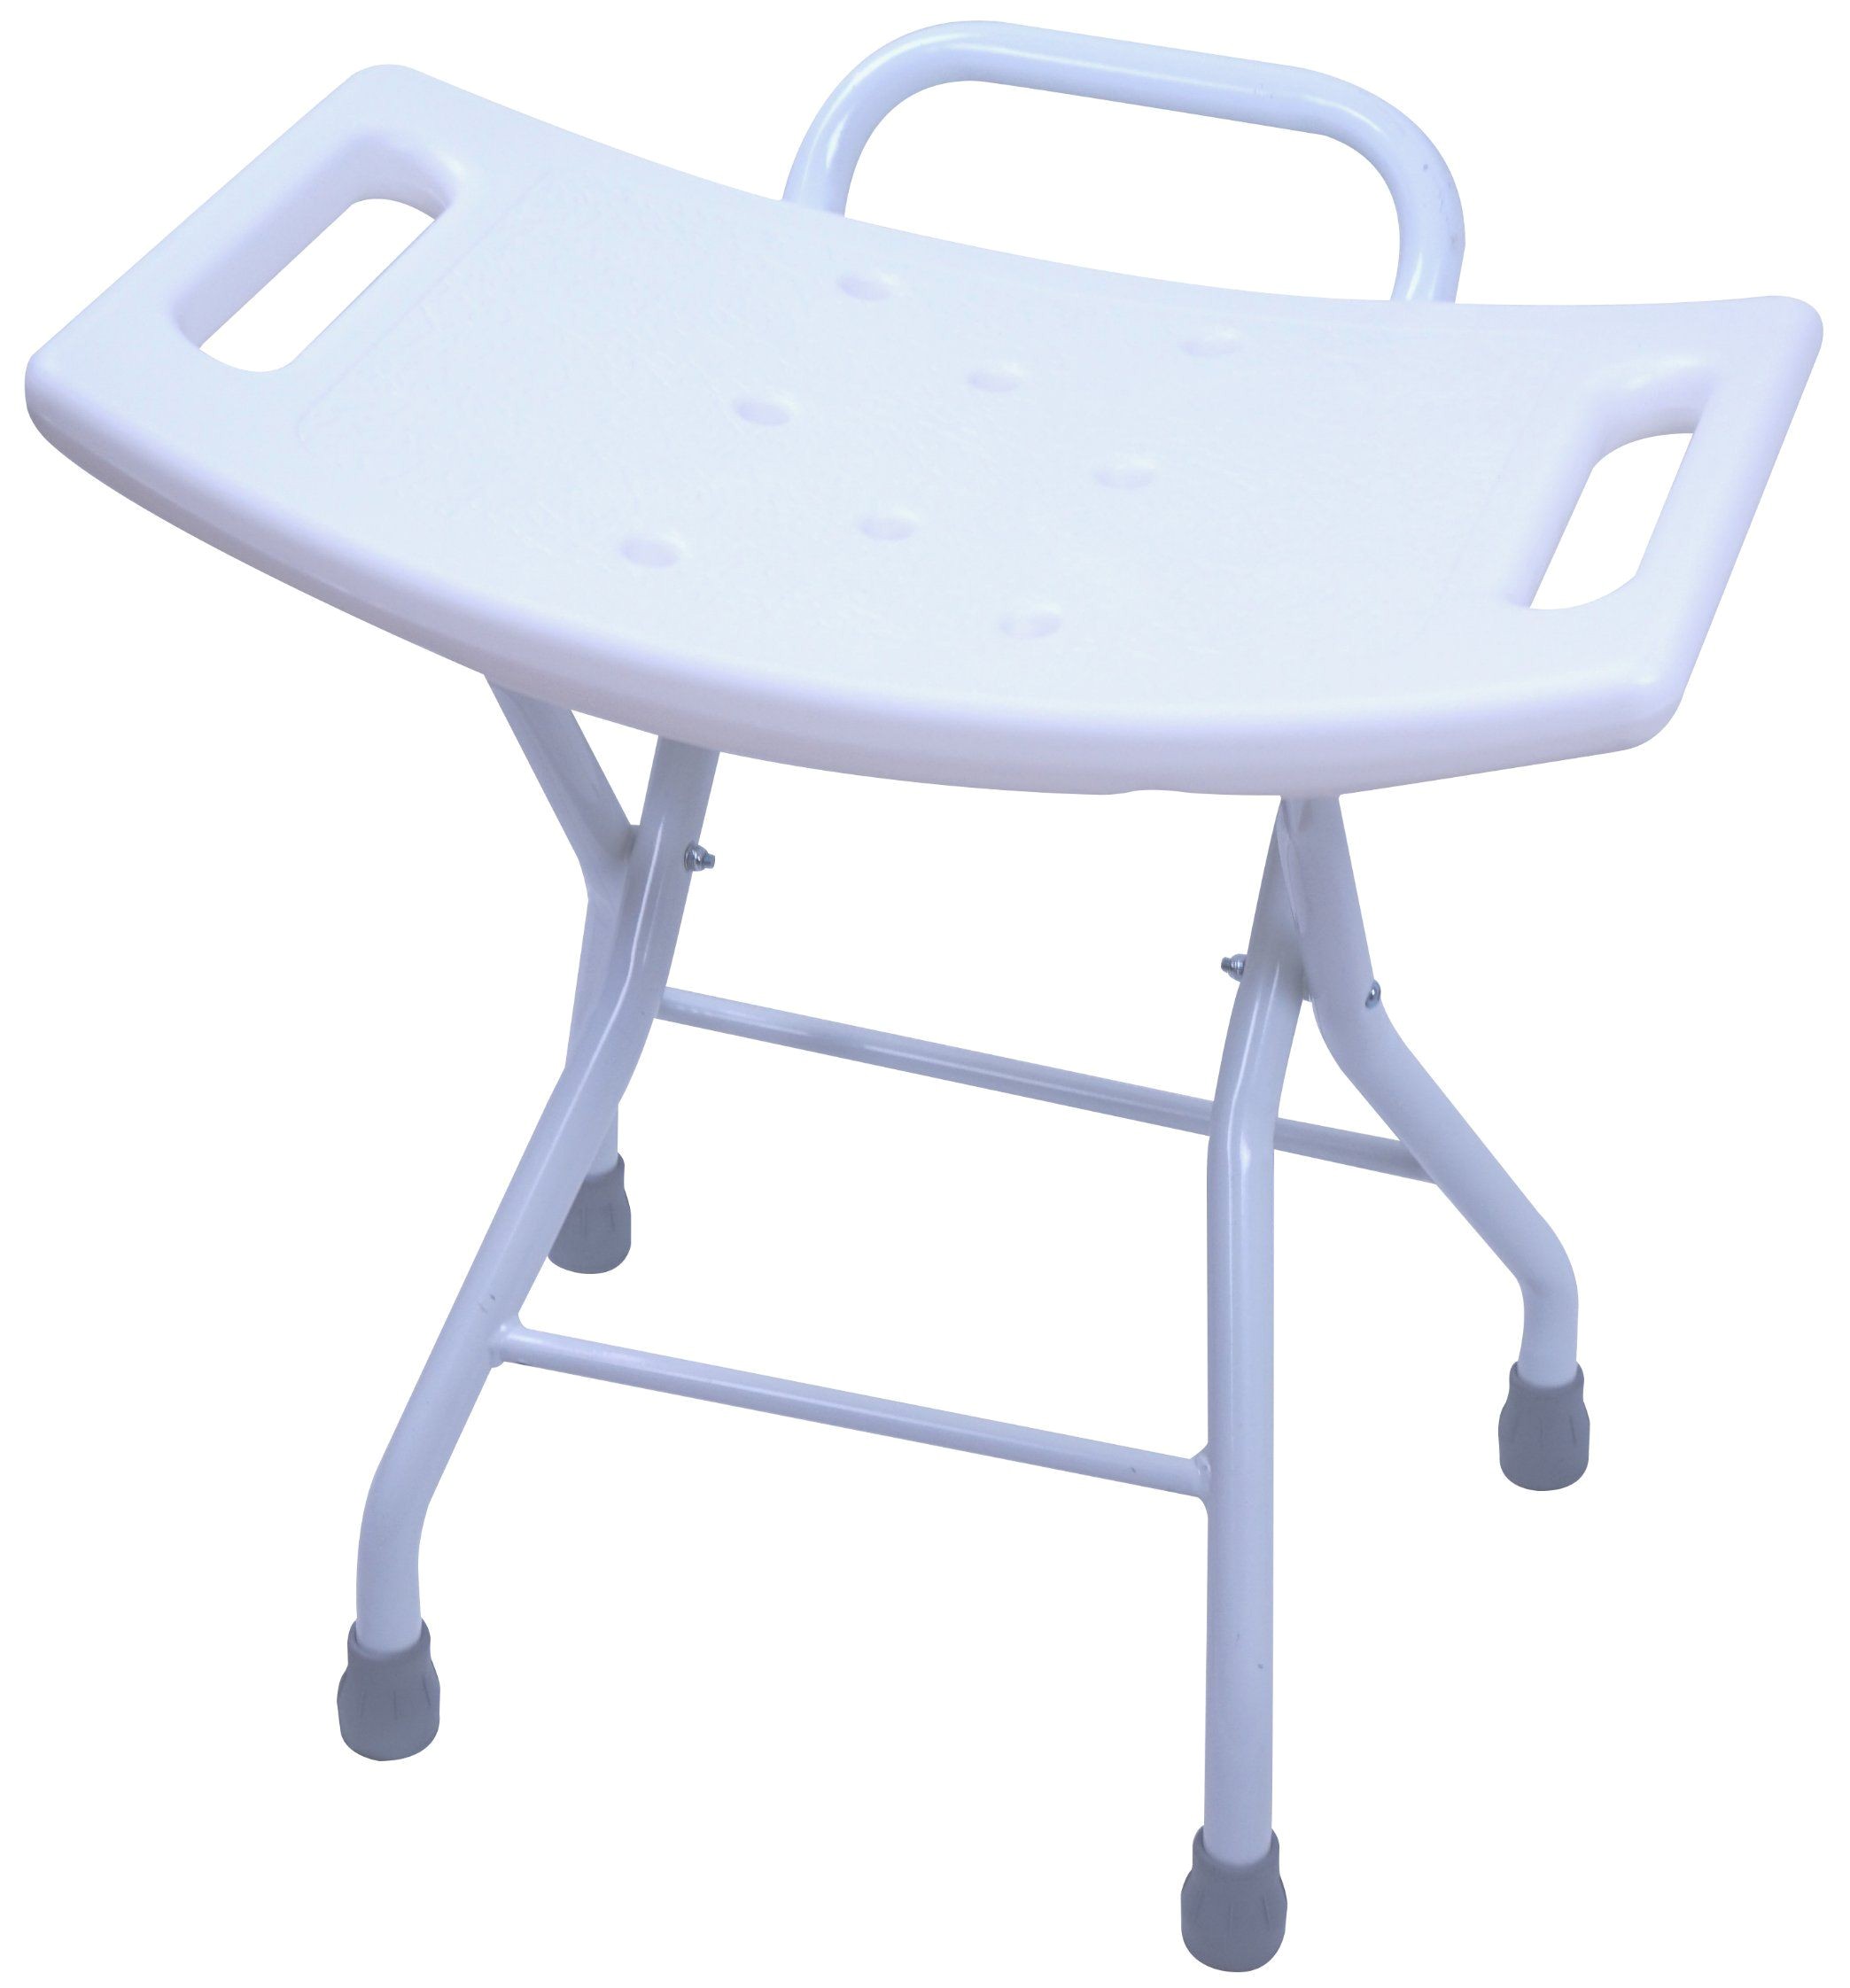 Shower Benches for Disabled Folding Shower Seat Stool Portable Bath Bench Chair with Hand Grab